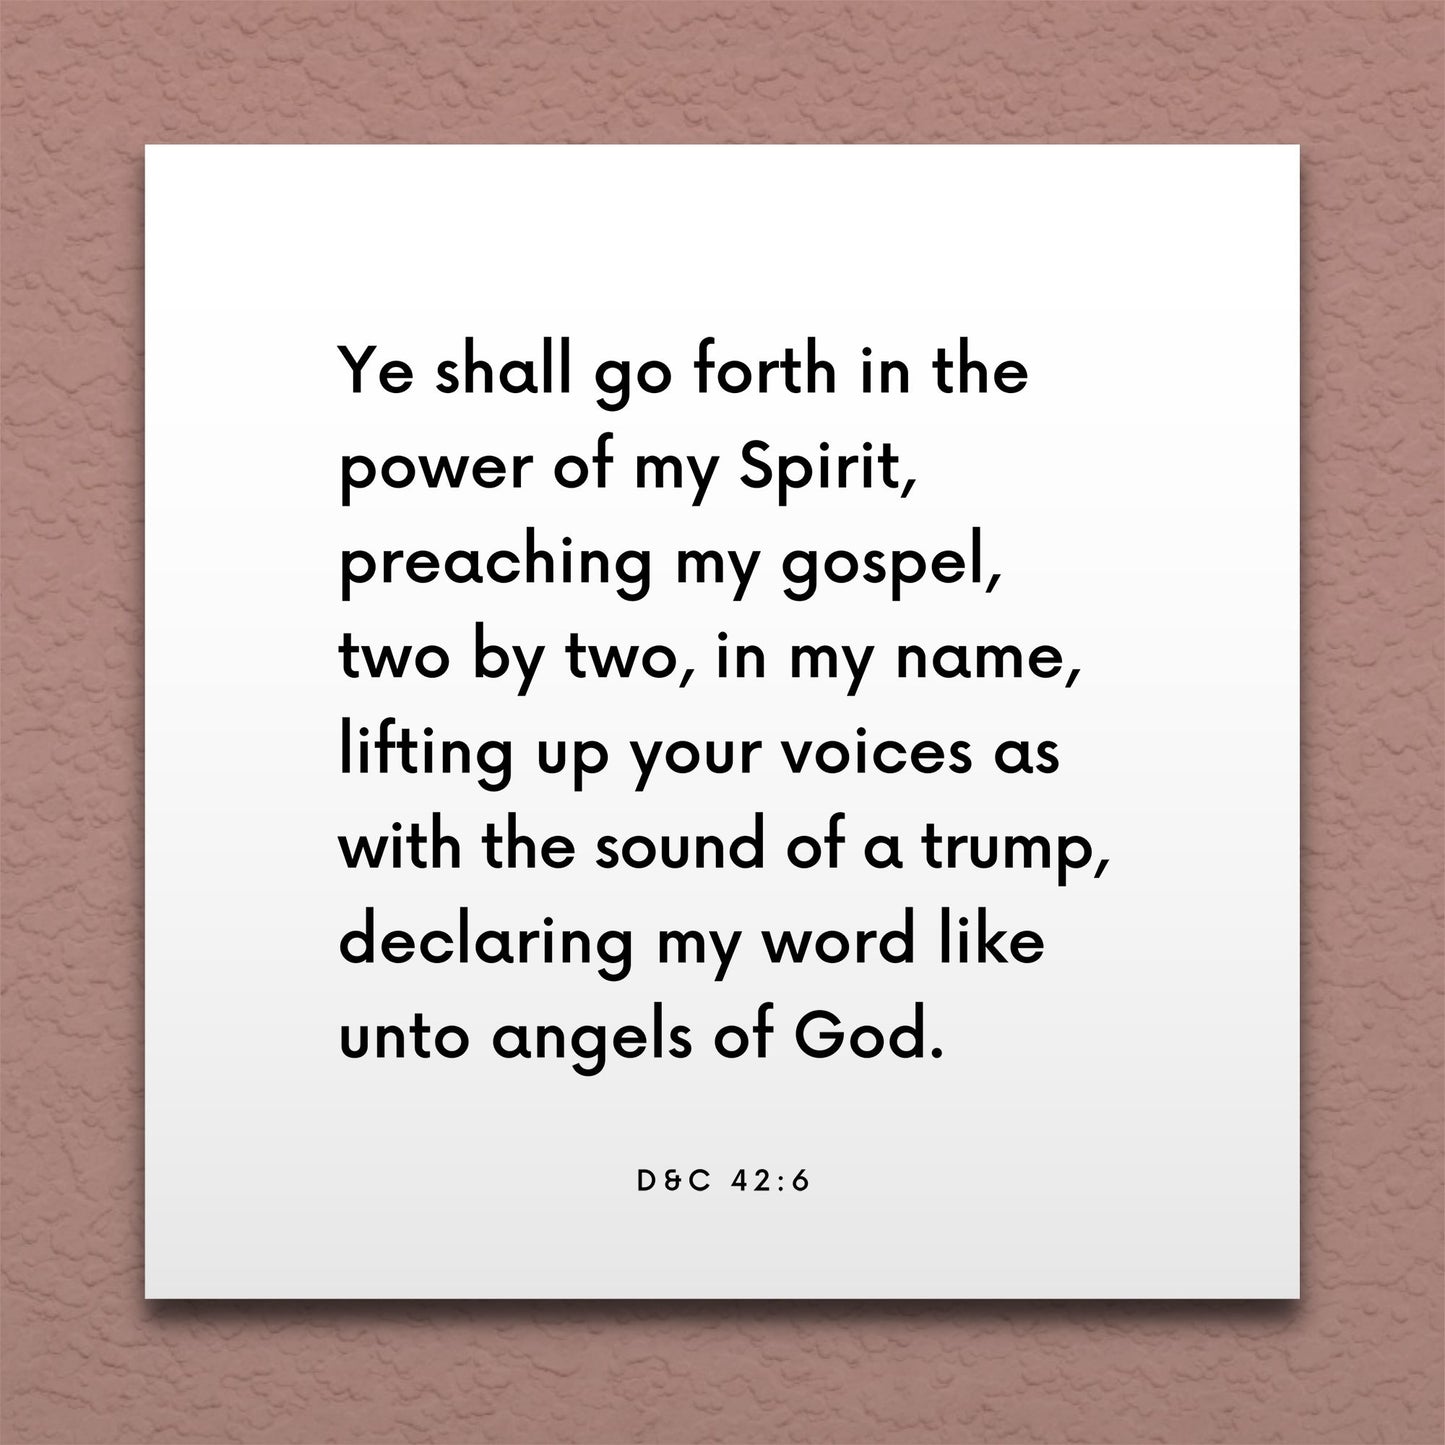 Wall-mounted scripture tile for D&C 42:6 - "Ye shall go forth in the power of my Spirit"